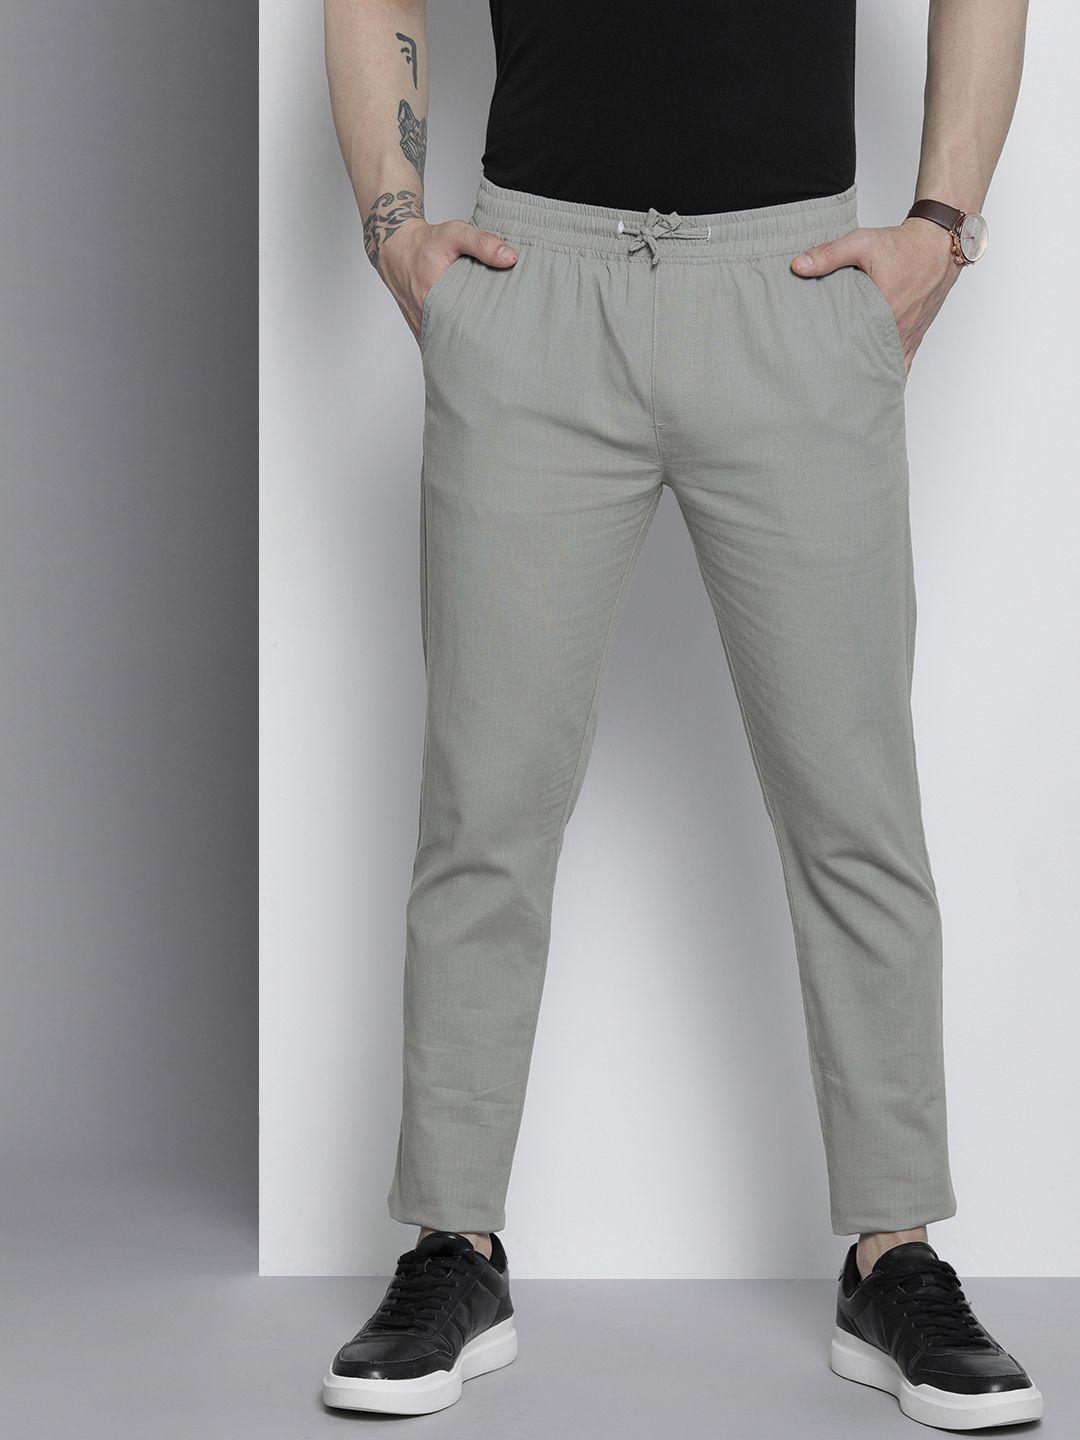 the-indian-garage-co-men-grey-slim-fit-cotton-trousers